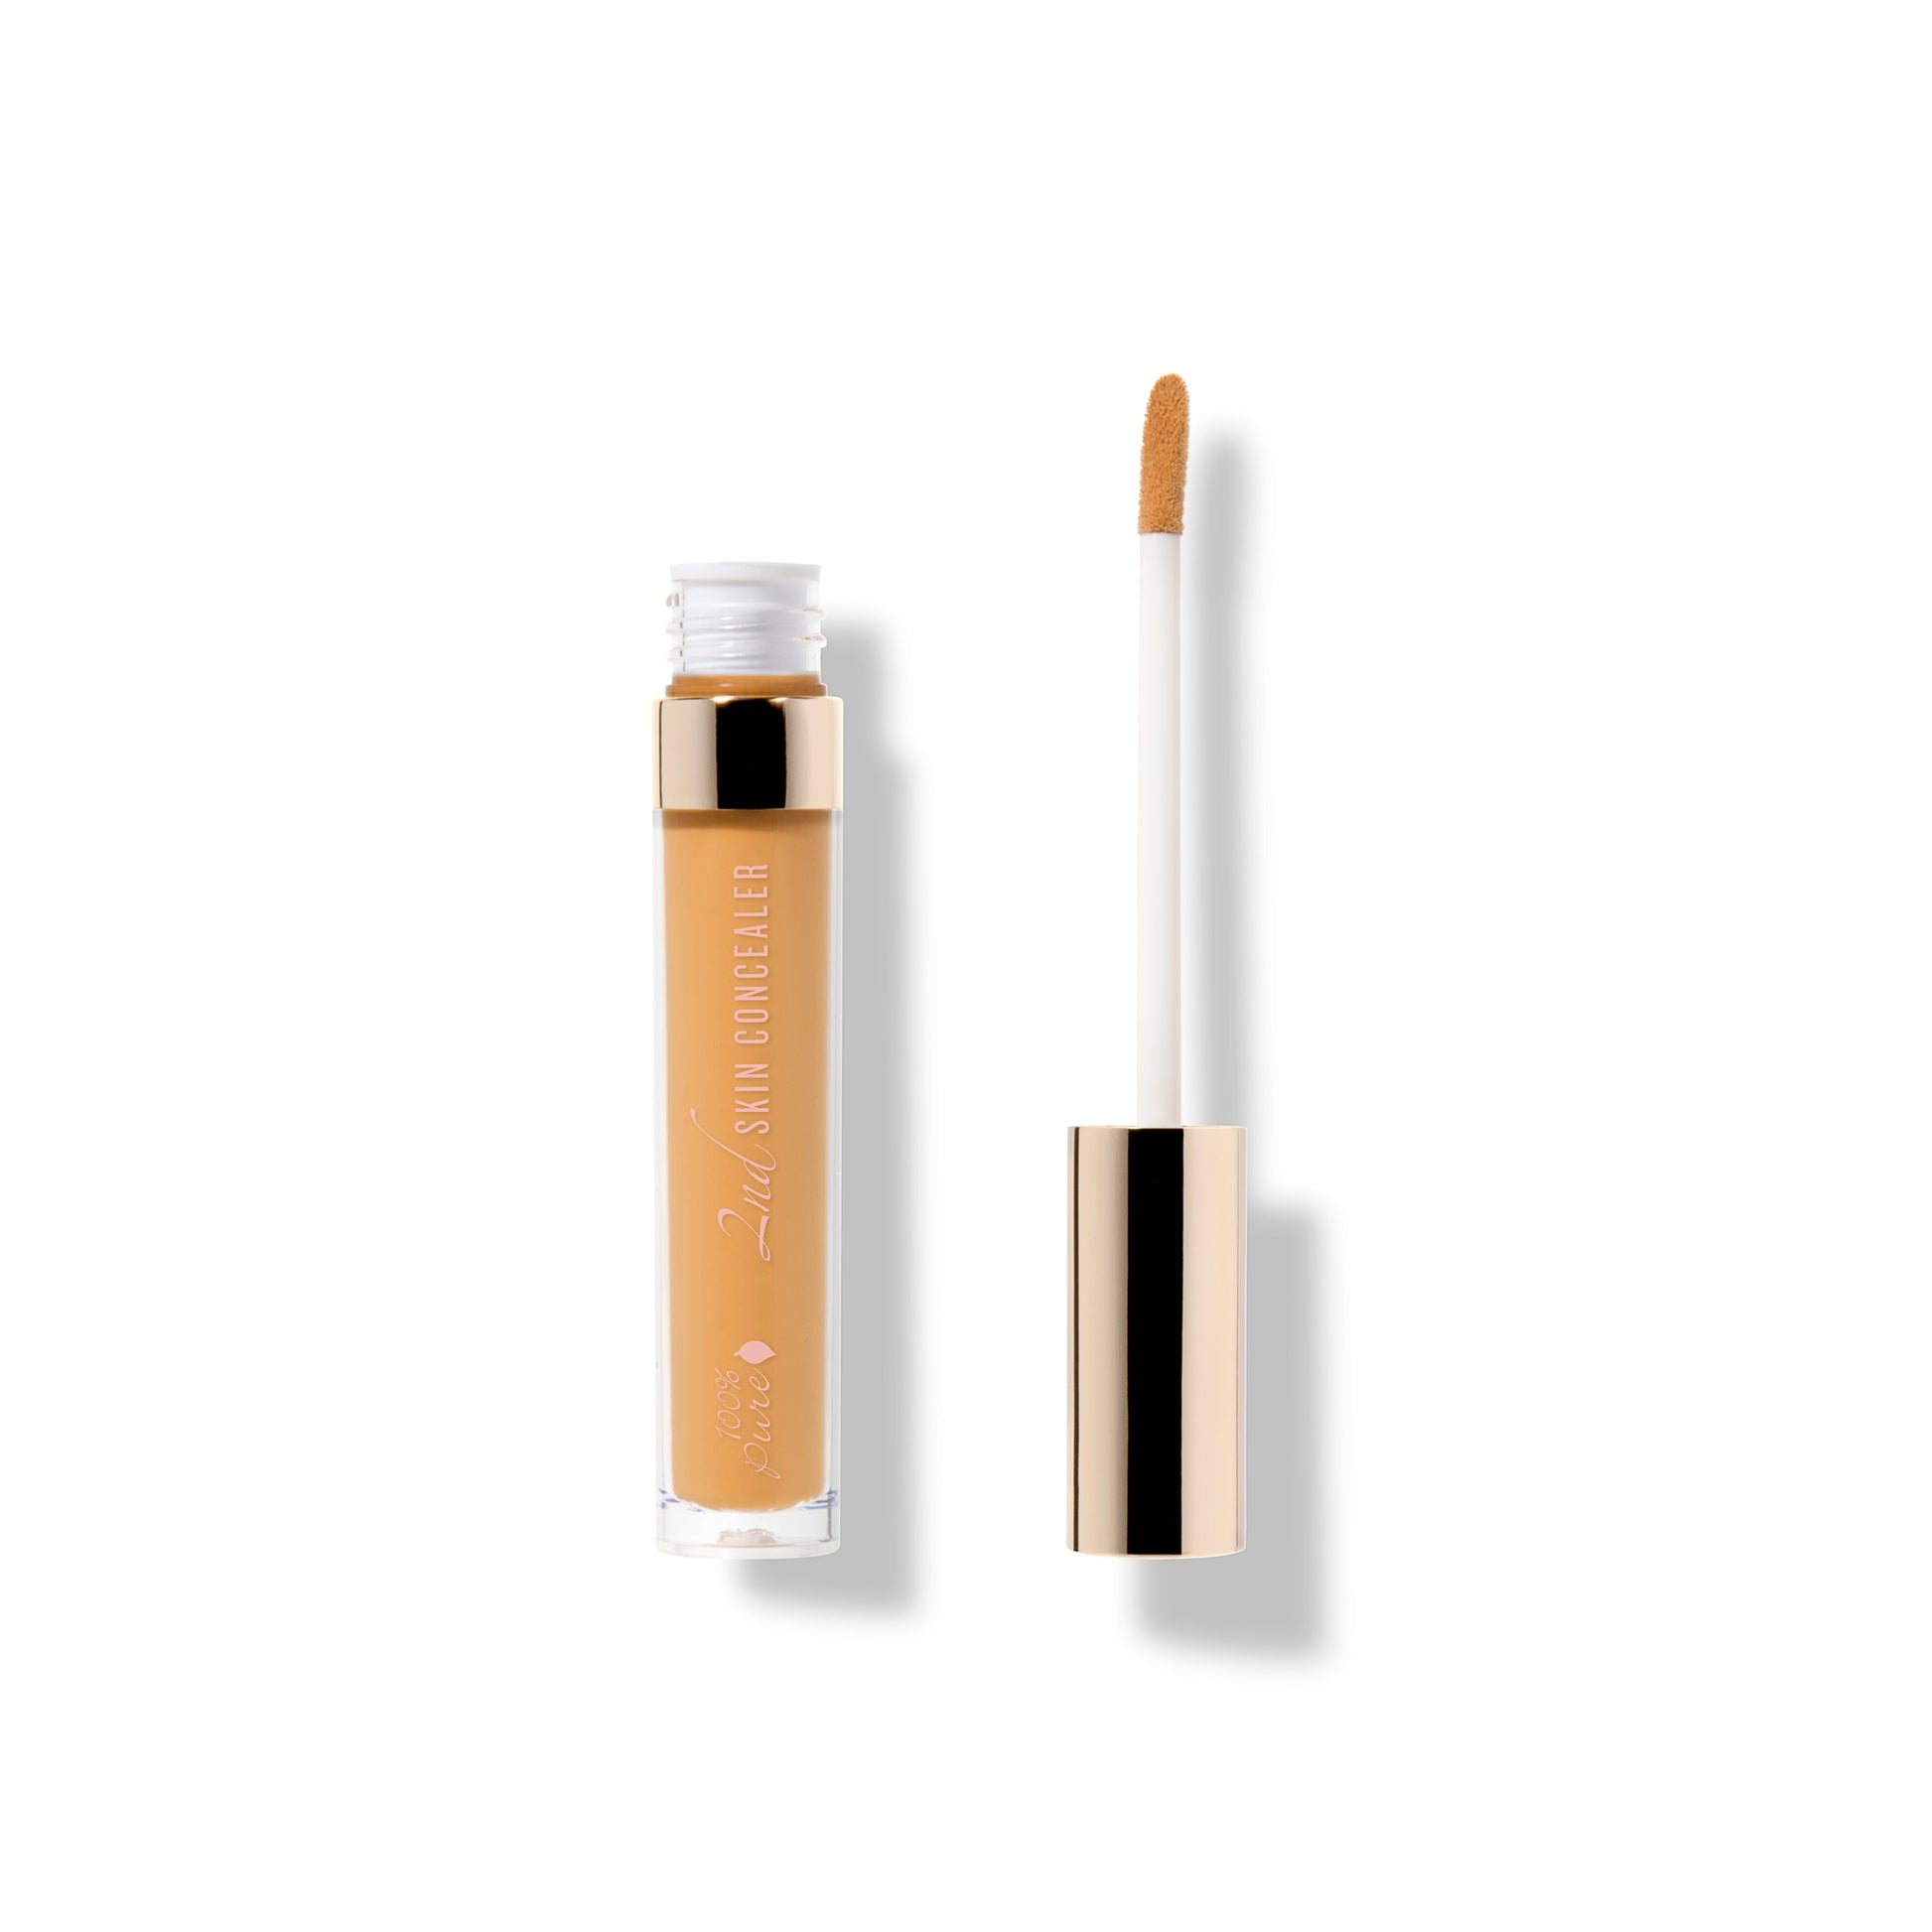 100% PURE Fruit Pigmented 2nd Skin Concealer shade 4